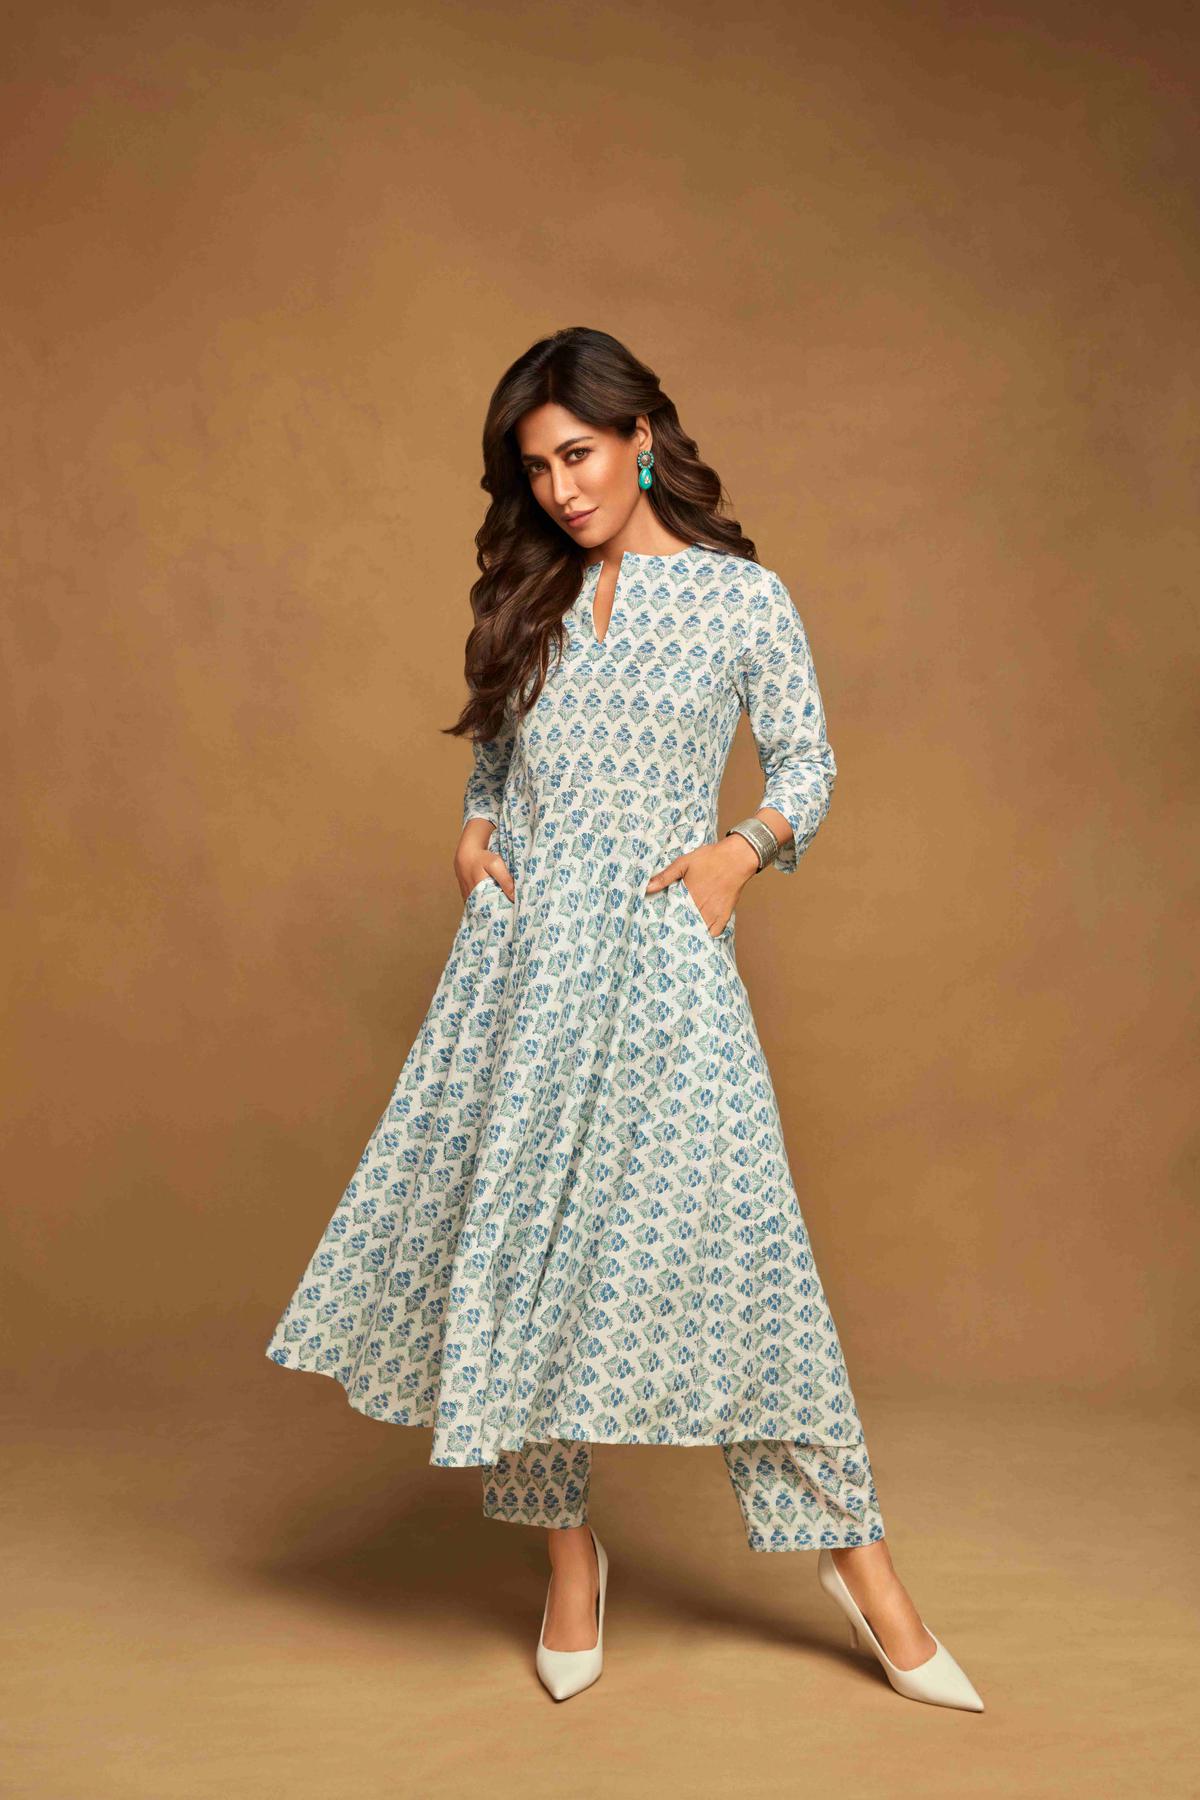 Chitrangada Singh wearing a piece from her latest Spring Summer 2023 collection for trueBrowns.